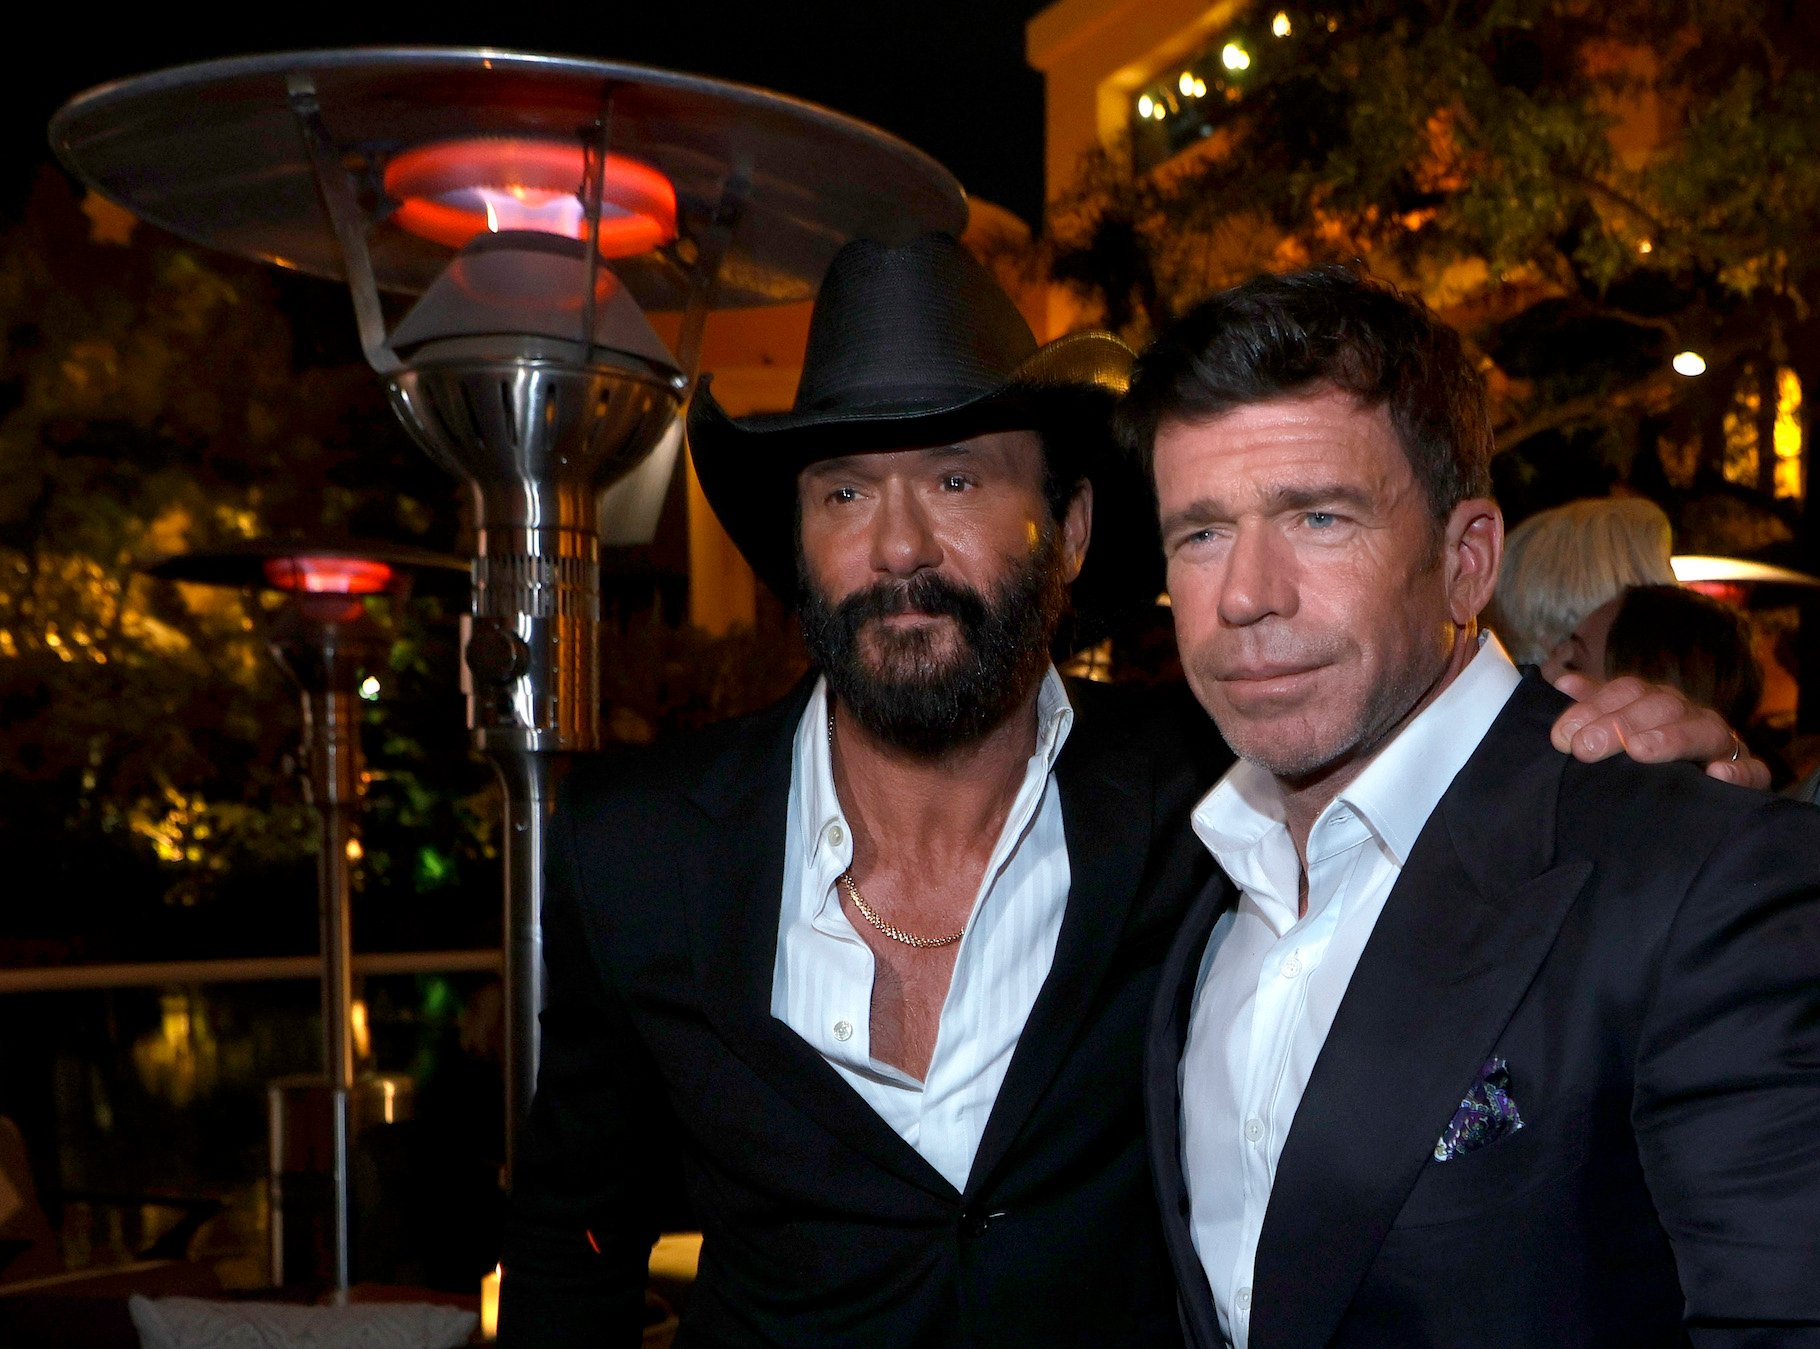 Tim McGraw from the '1883' cast with his arm around show creator Taylor Sheridan at an event